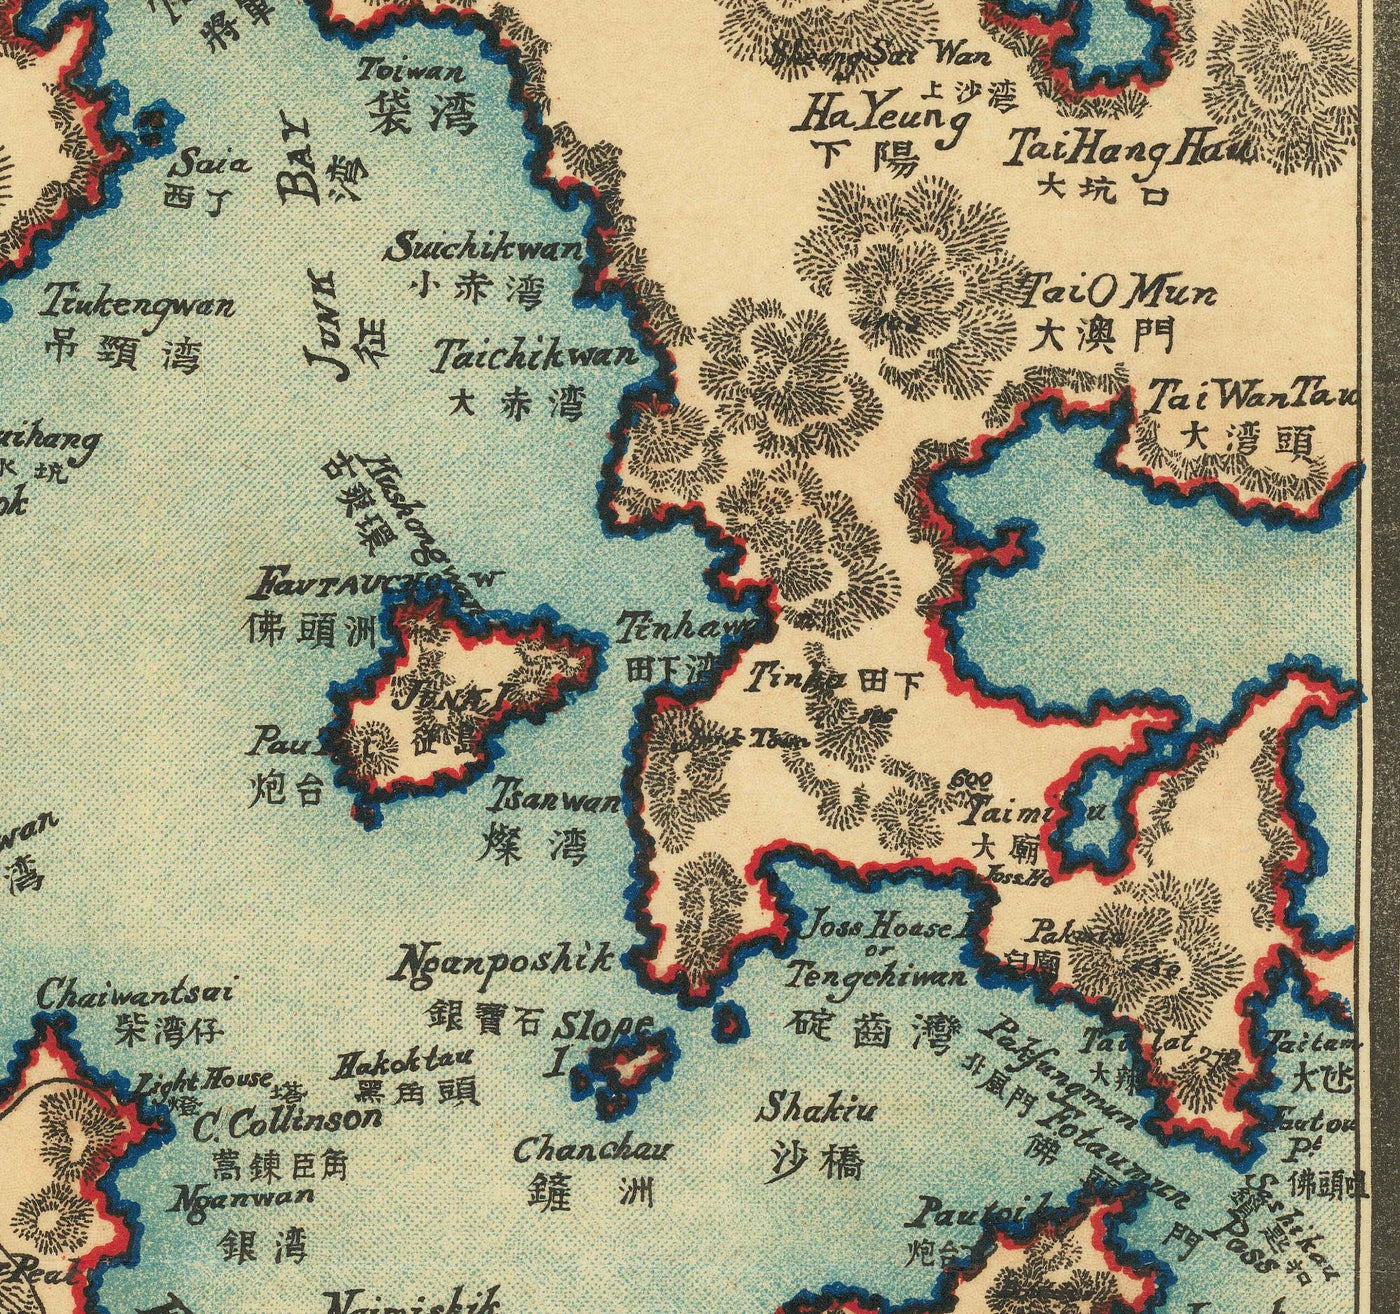 Old Map of Hong Kong, 1924 by Sung Chun Wa - Central, Kowloon, Causeway, Victoria Harbour, Islands, Mountains, Lamma